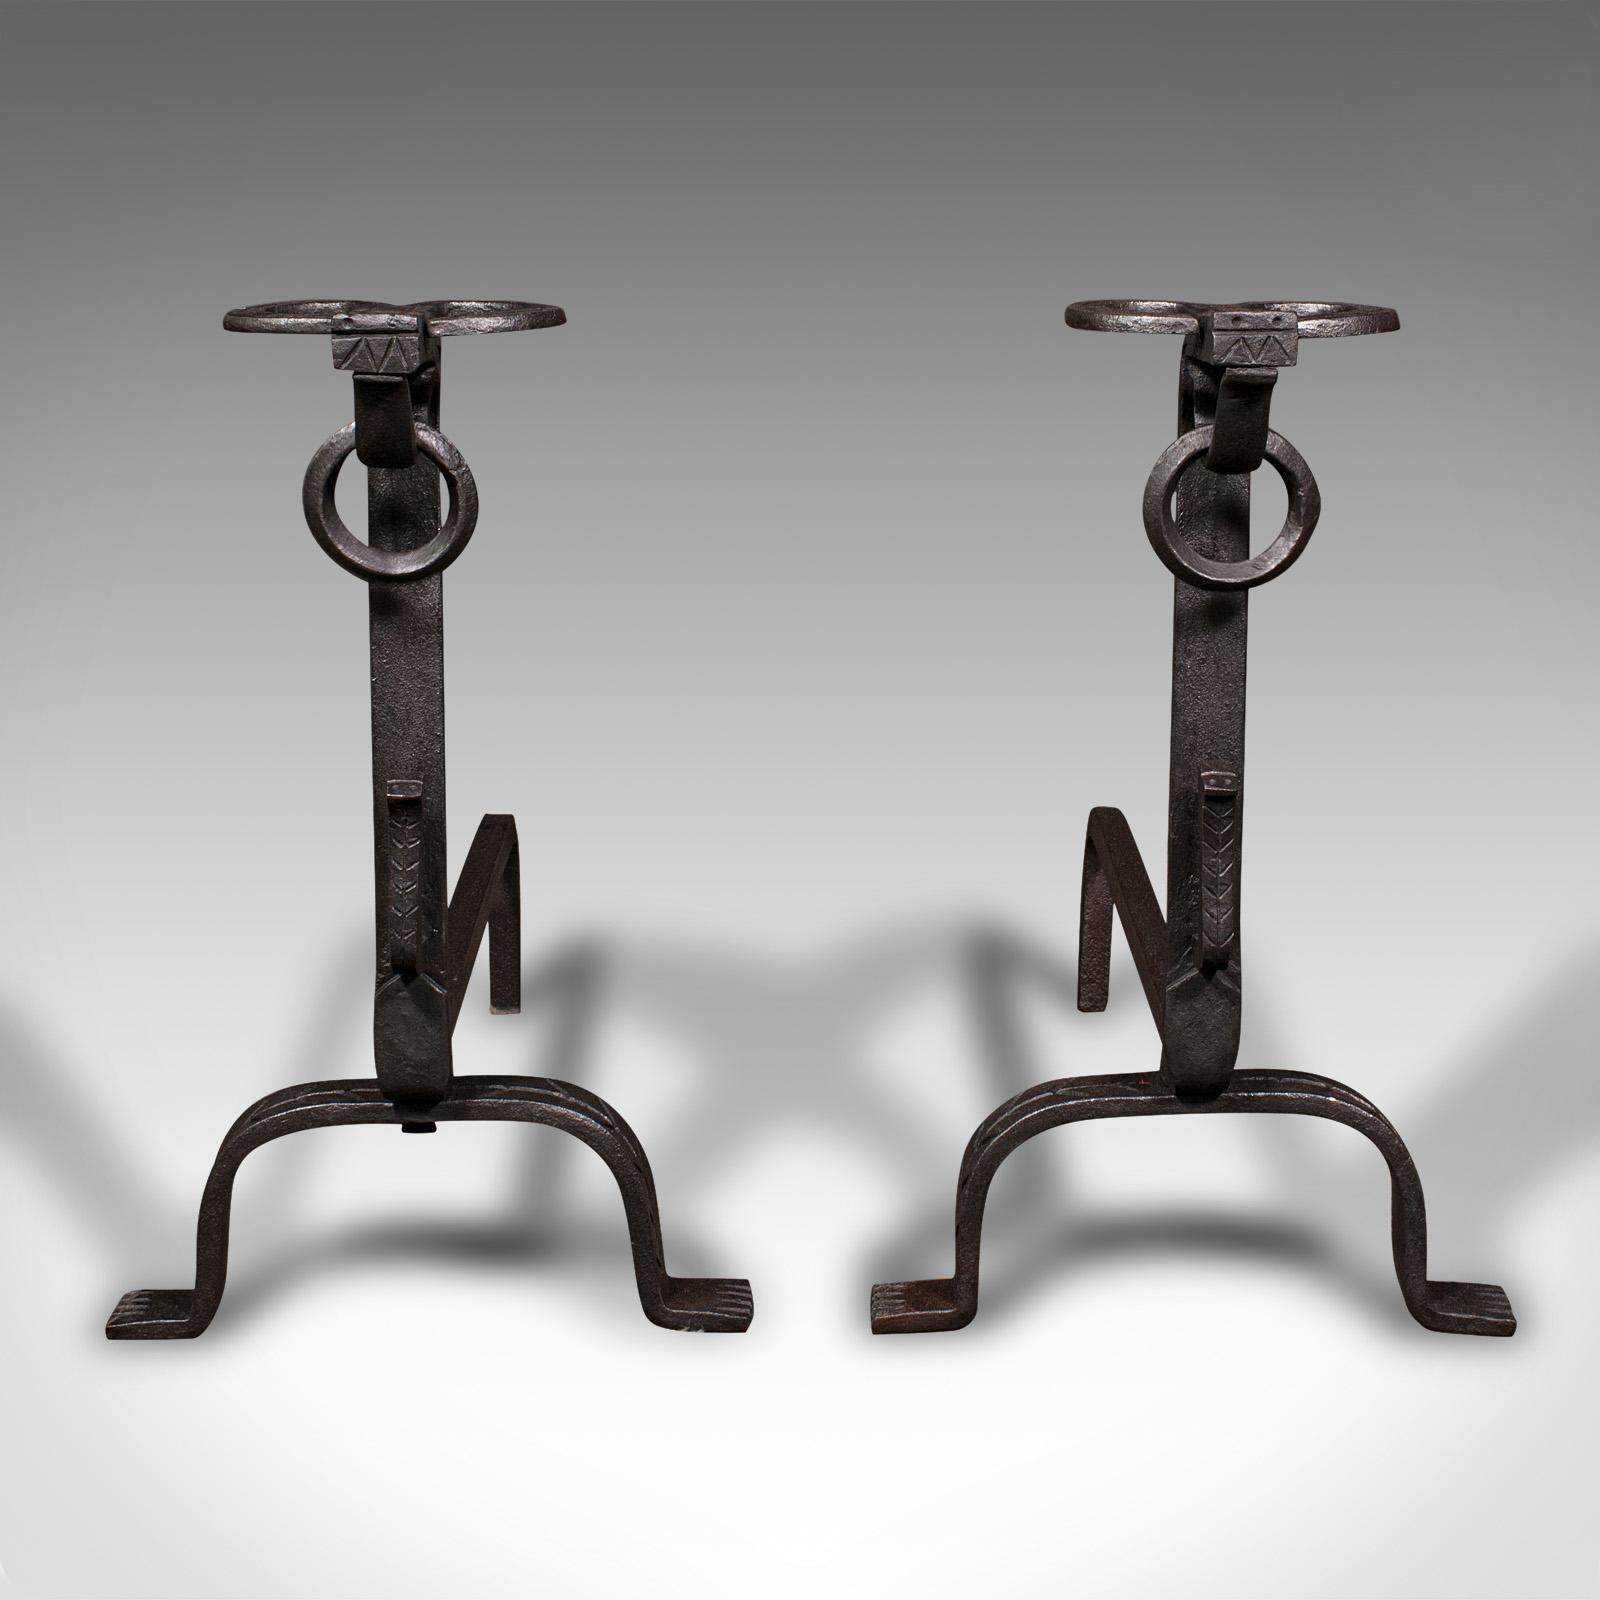 This is a large pair of antique firedogs. An English, wrought iron fireplace andirons, dating to the Victorian period, circa 1900.

Substantial size, ideal as tool rests or hosting a large fire grate
Displaying a desirable aged patina and in good